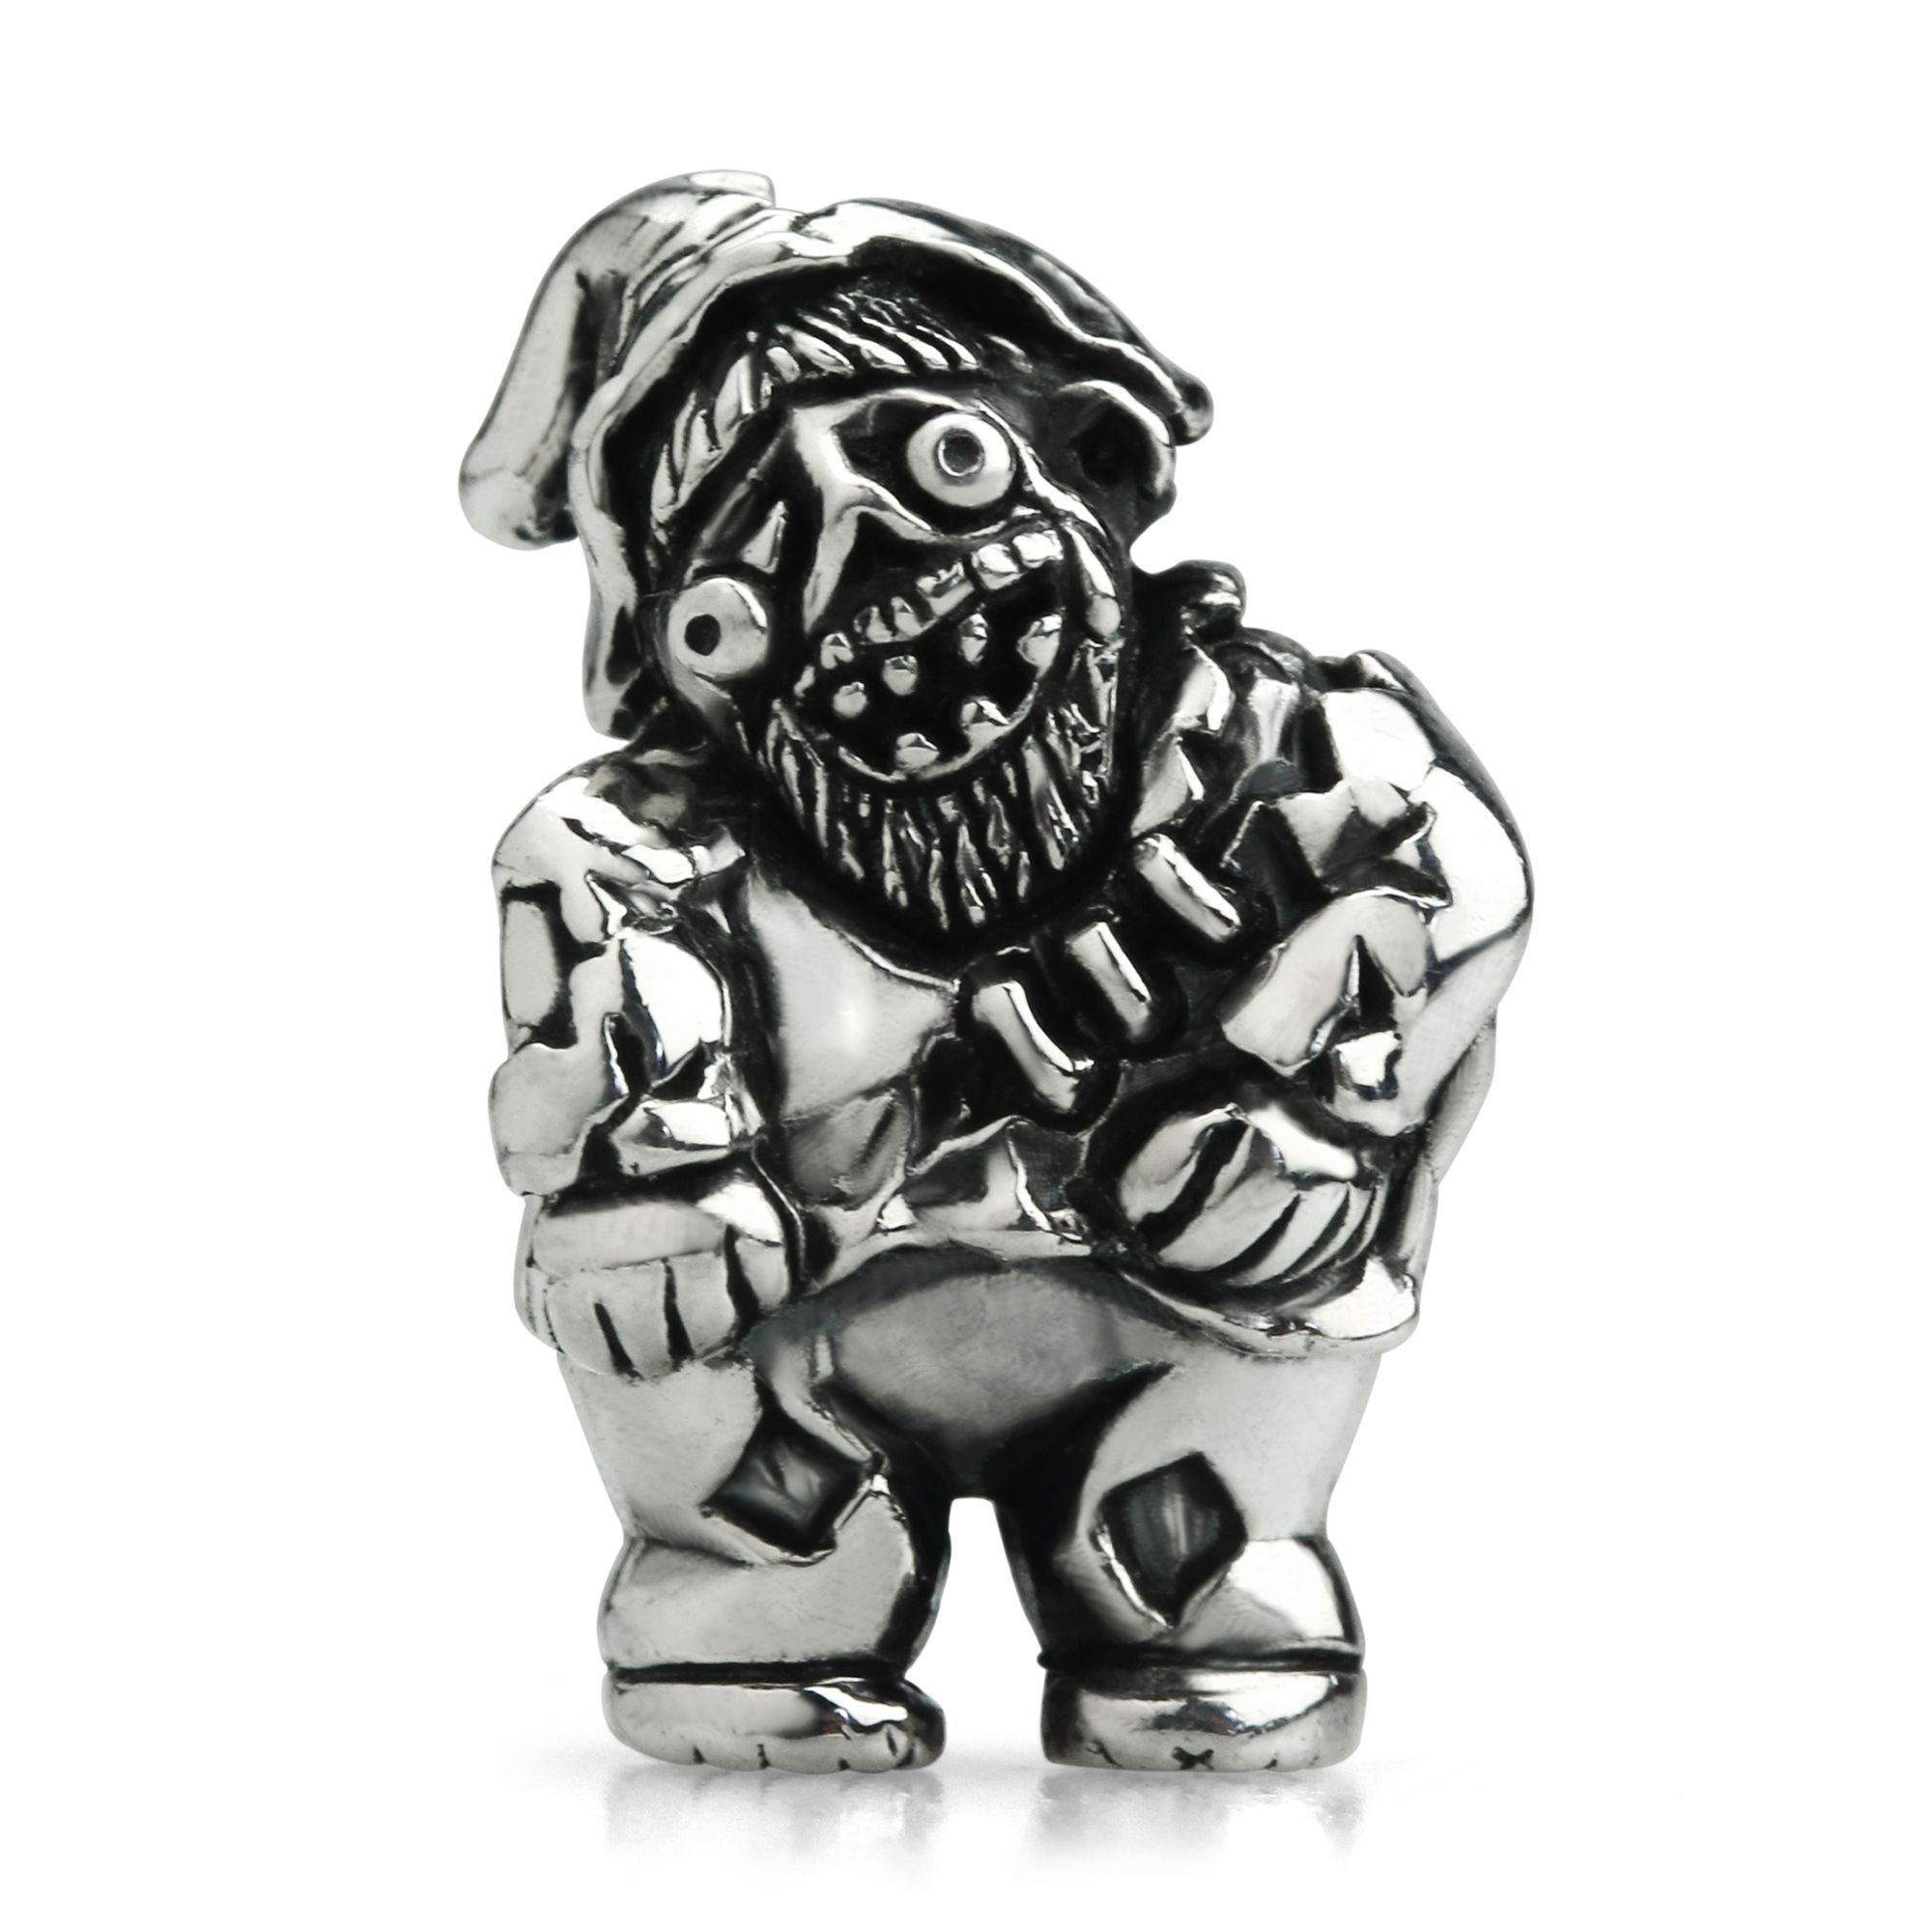 Zohmbie Gnome OHM Beads Silver 925 Charm OHM Halloween Collection เครื่องประดับ เงิน บีด